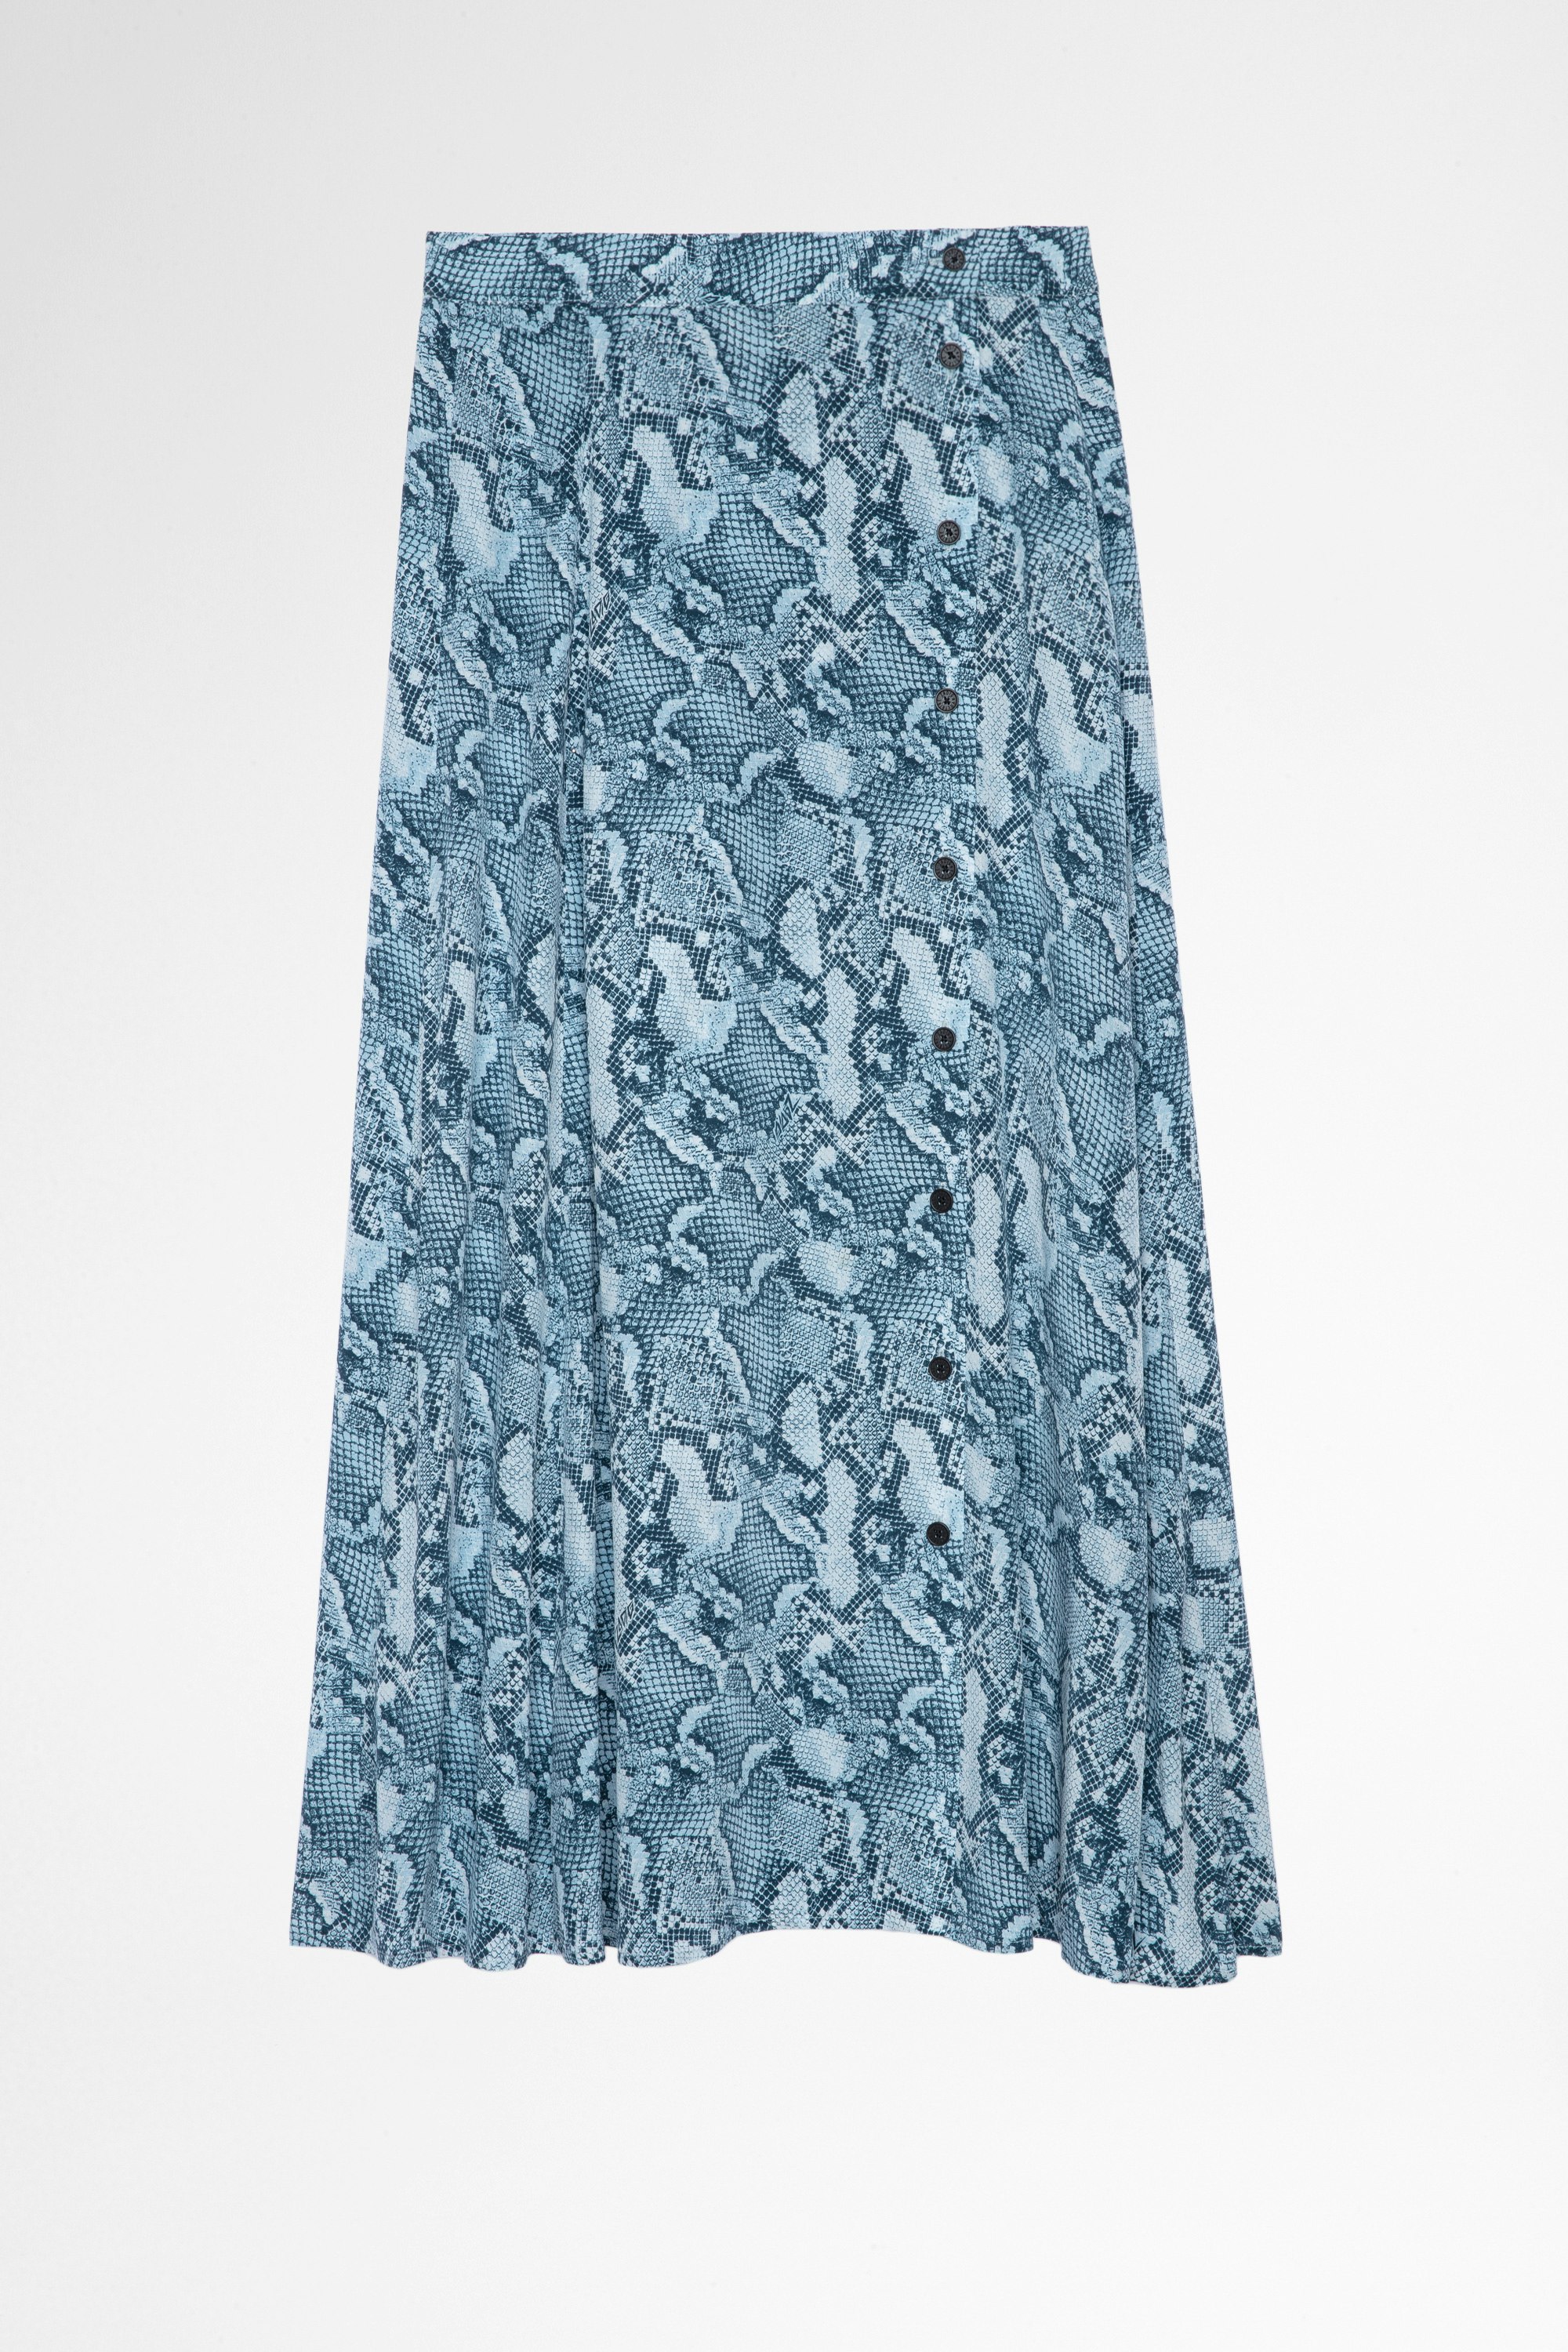 June シルク スカート Women's long skirt in blue silk with snake print and buttons